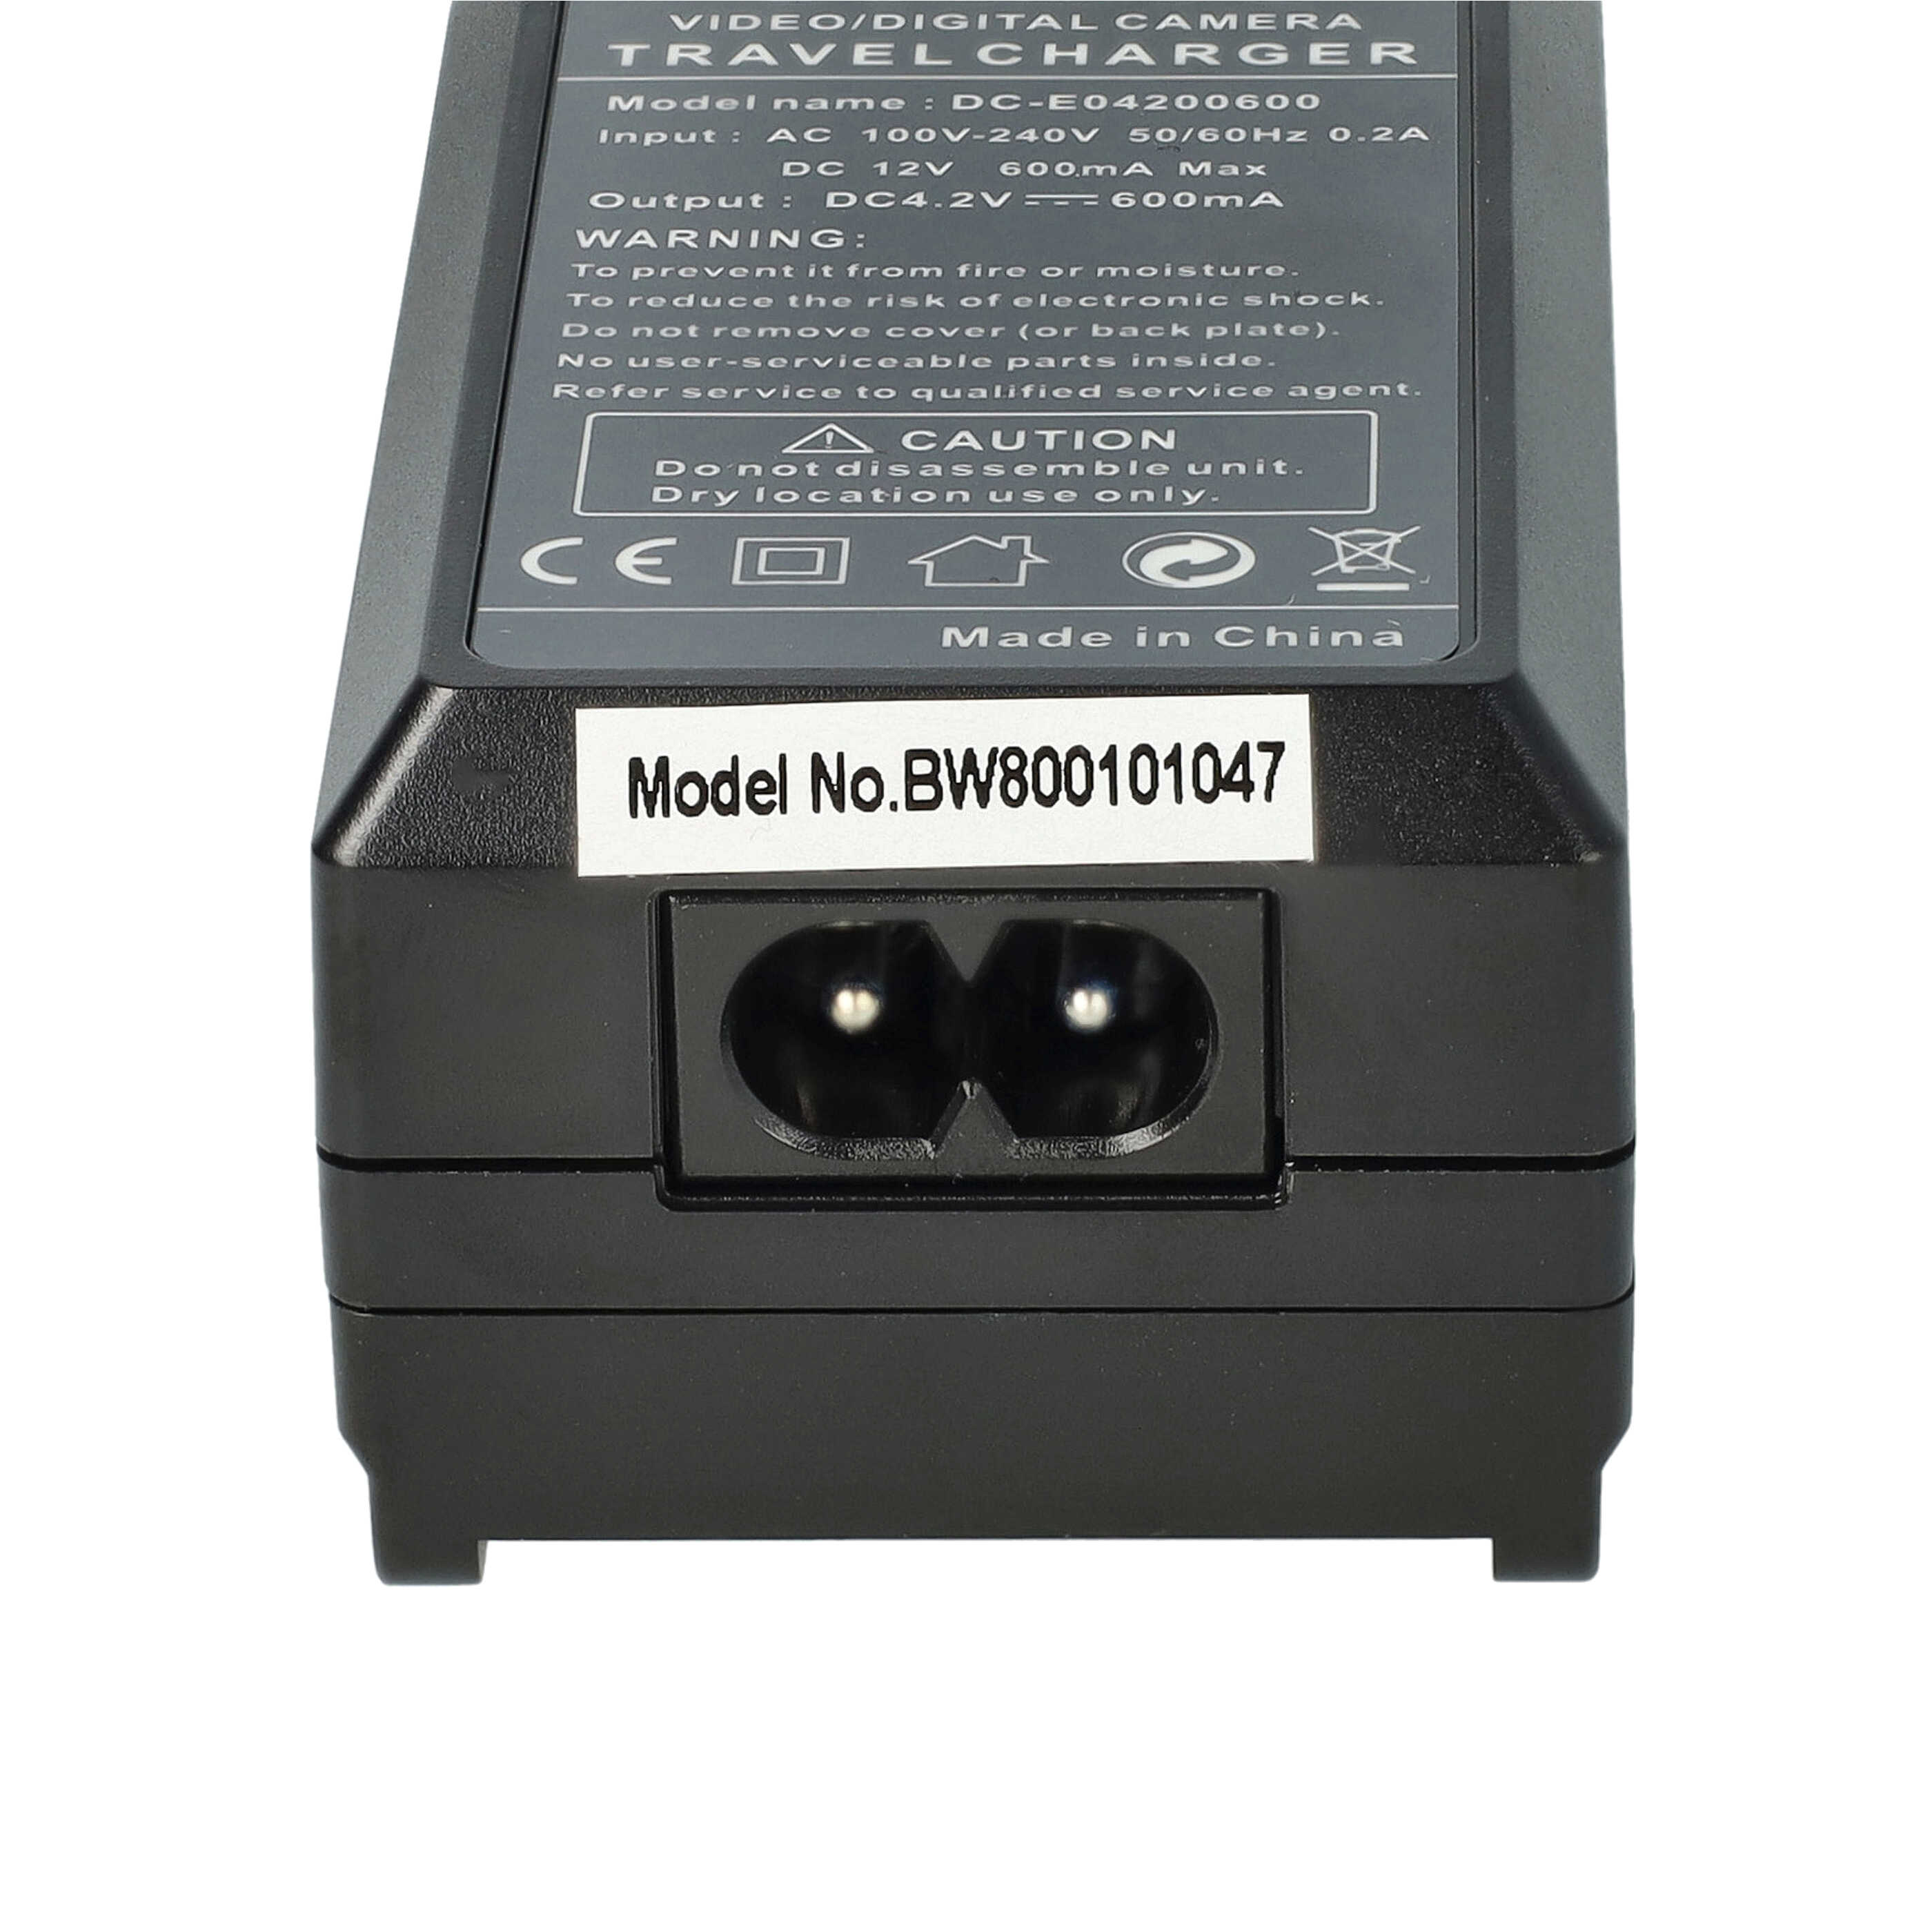 Battery Charger suitable for Lumix DMC-3D1 Camera etc. - 0.6 A, 4.2 V